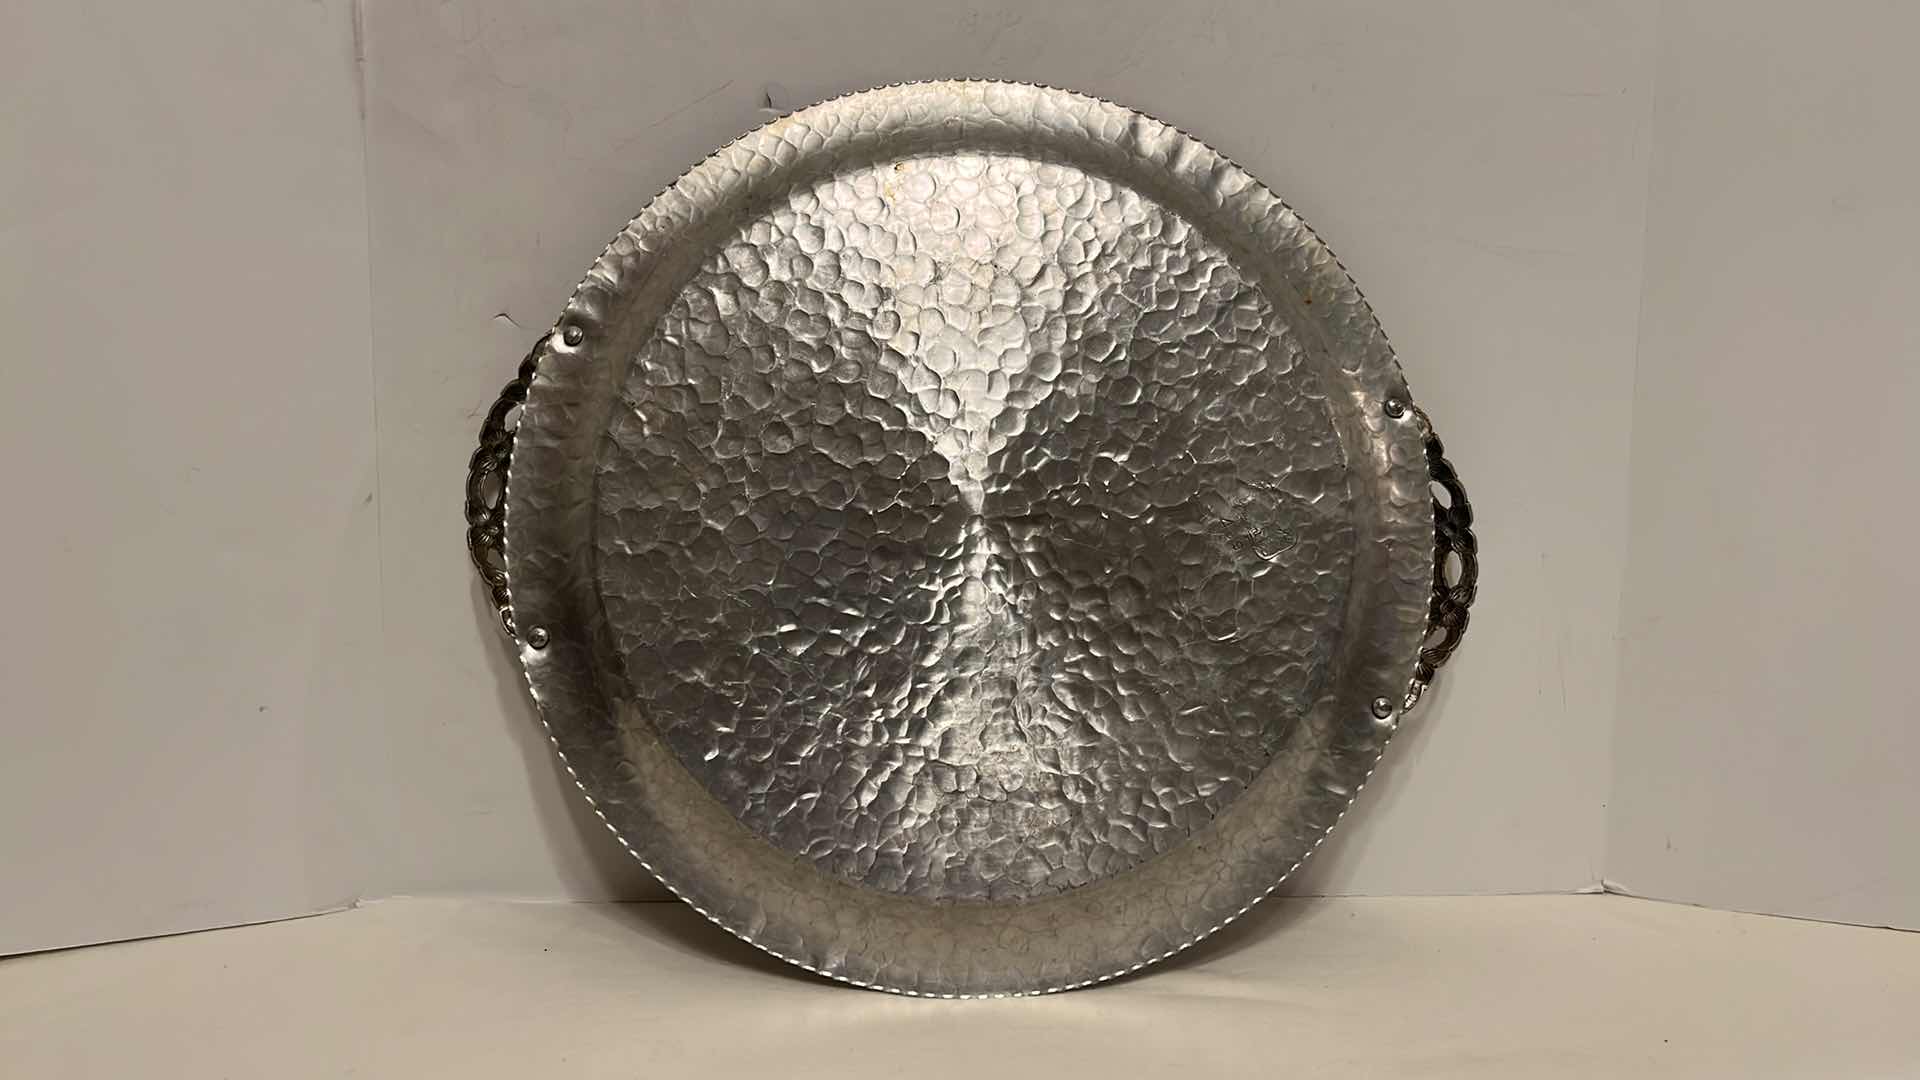 Photo 4 of VINTAGE HAND WROUGHT HAMMERED ALUMINUM TULIP 14” TRAY CREATIONS BY RODNEY KENT #409 ALUMINUM TULIP